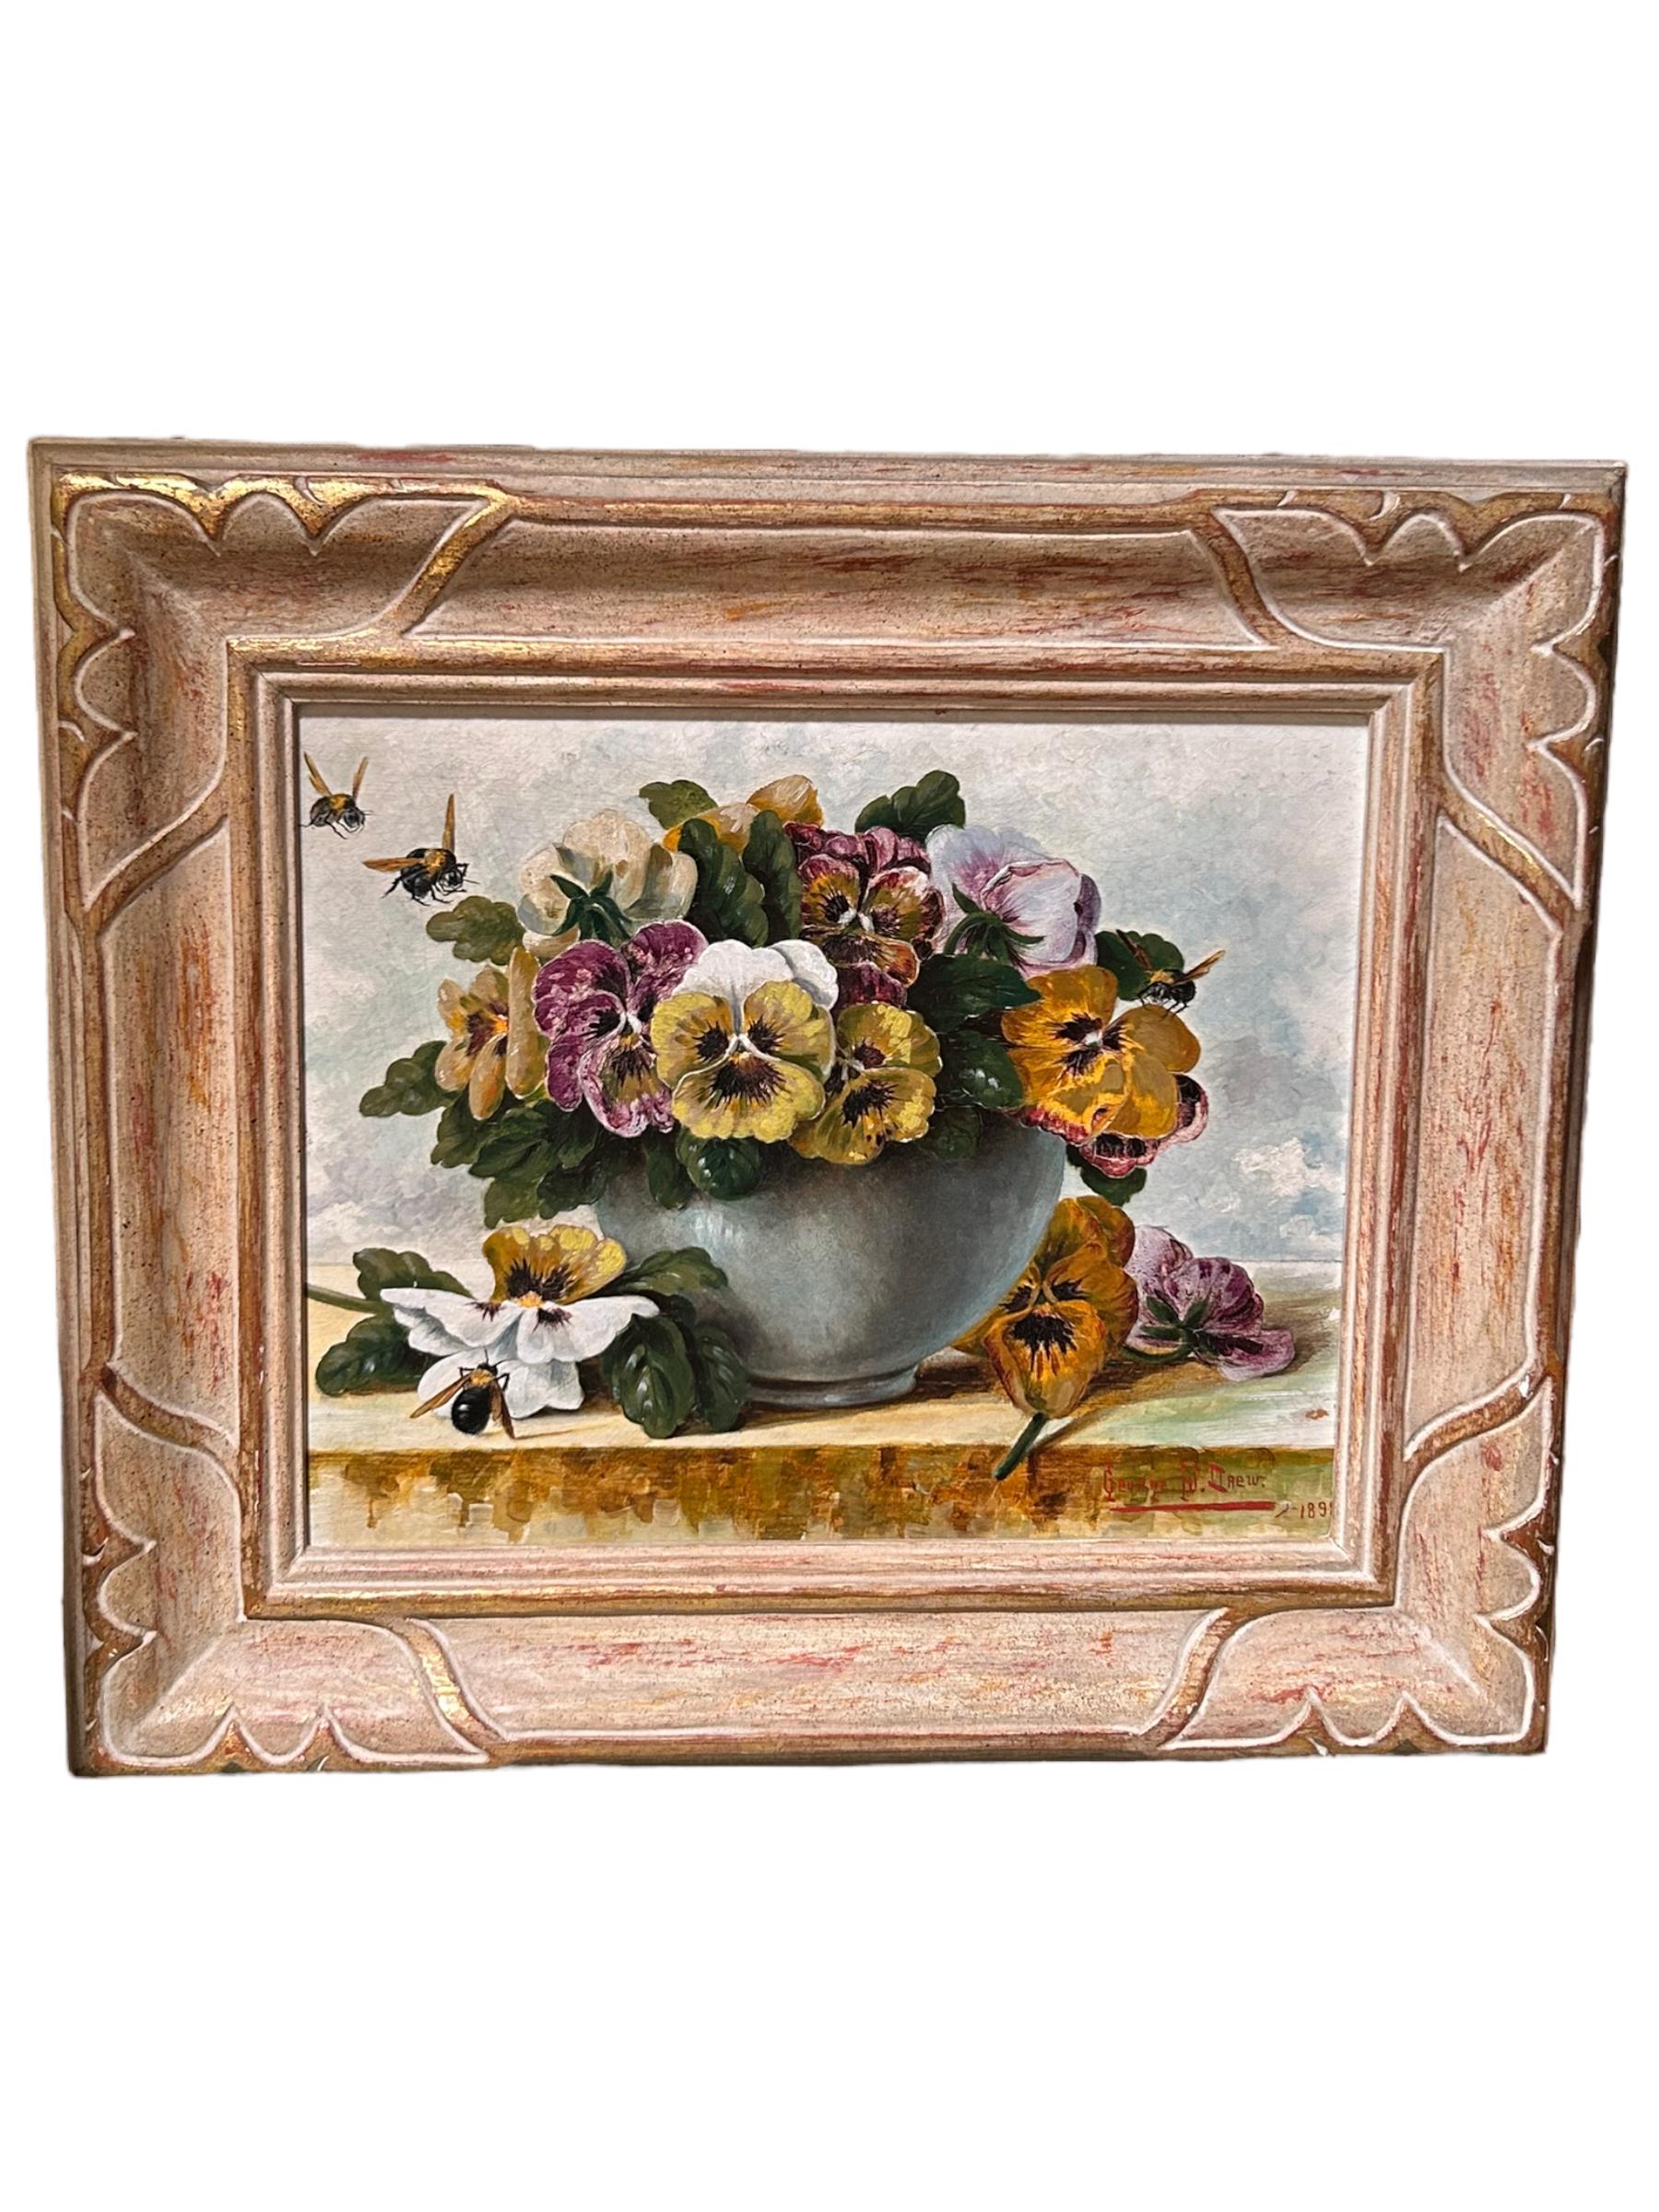 This original George W. Drew oil painting from 1898 embodies the beauty of still life art.  The artist’s Barbizon style is a testament to his skill and creativity.  The painting is perfect for anyone who appreciates art and wants to add a touch of